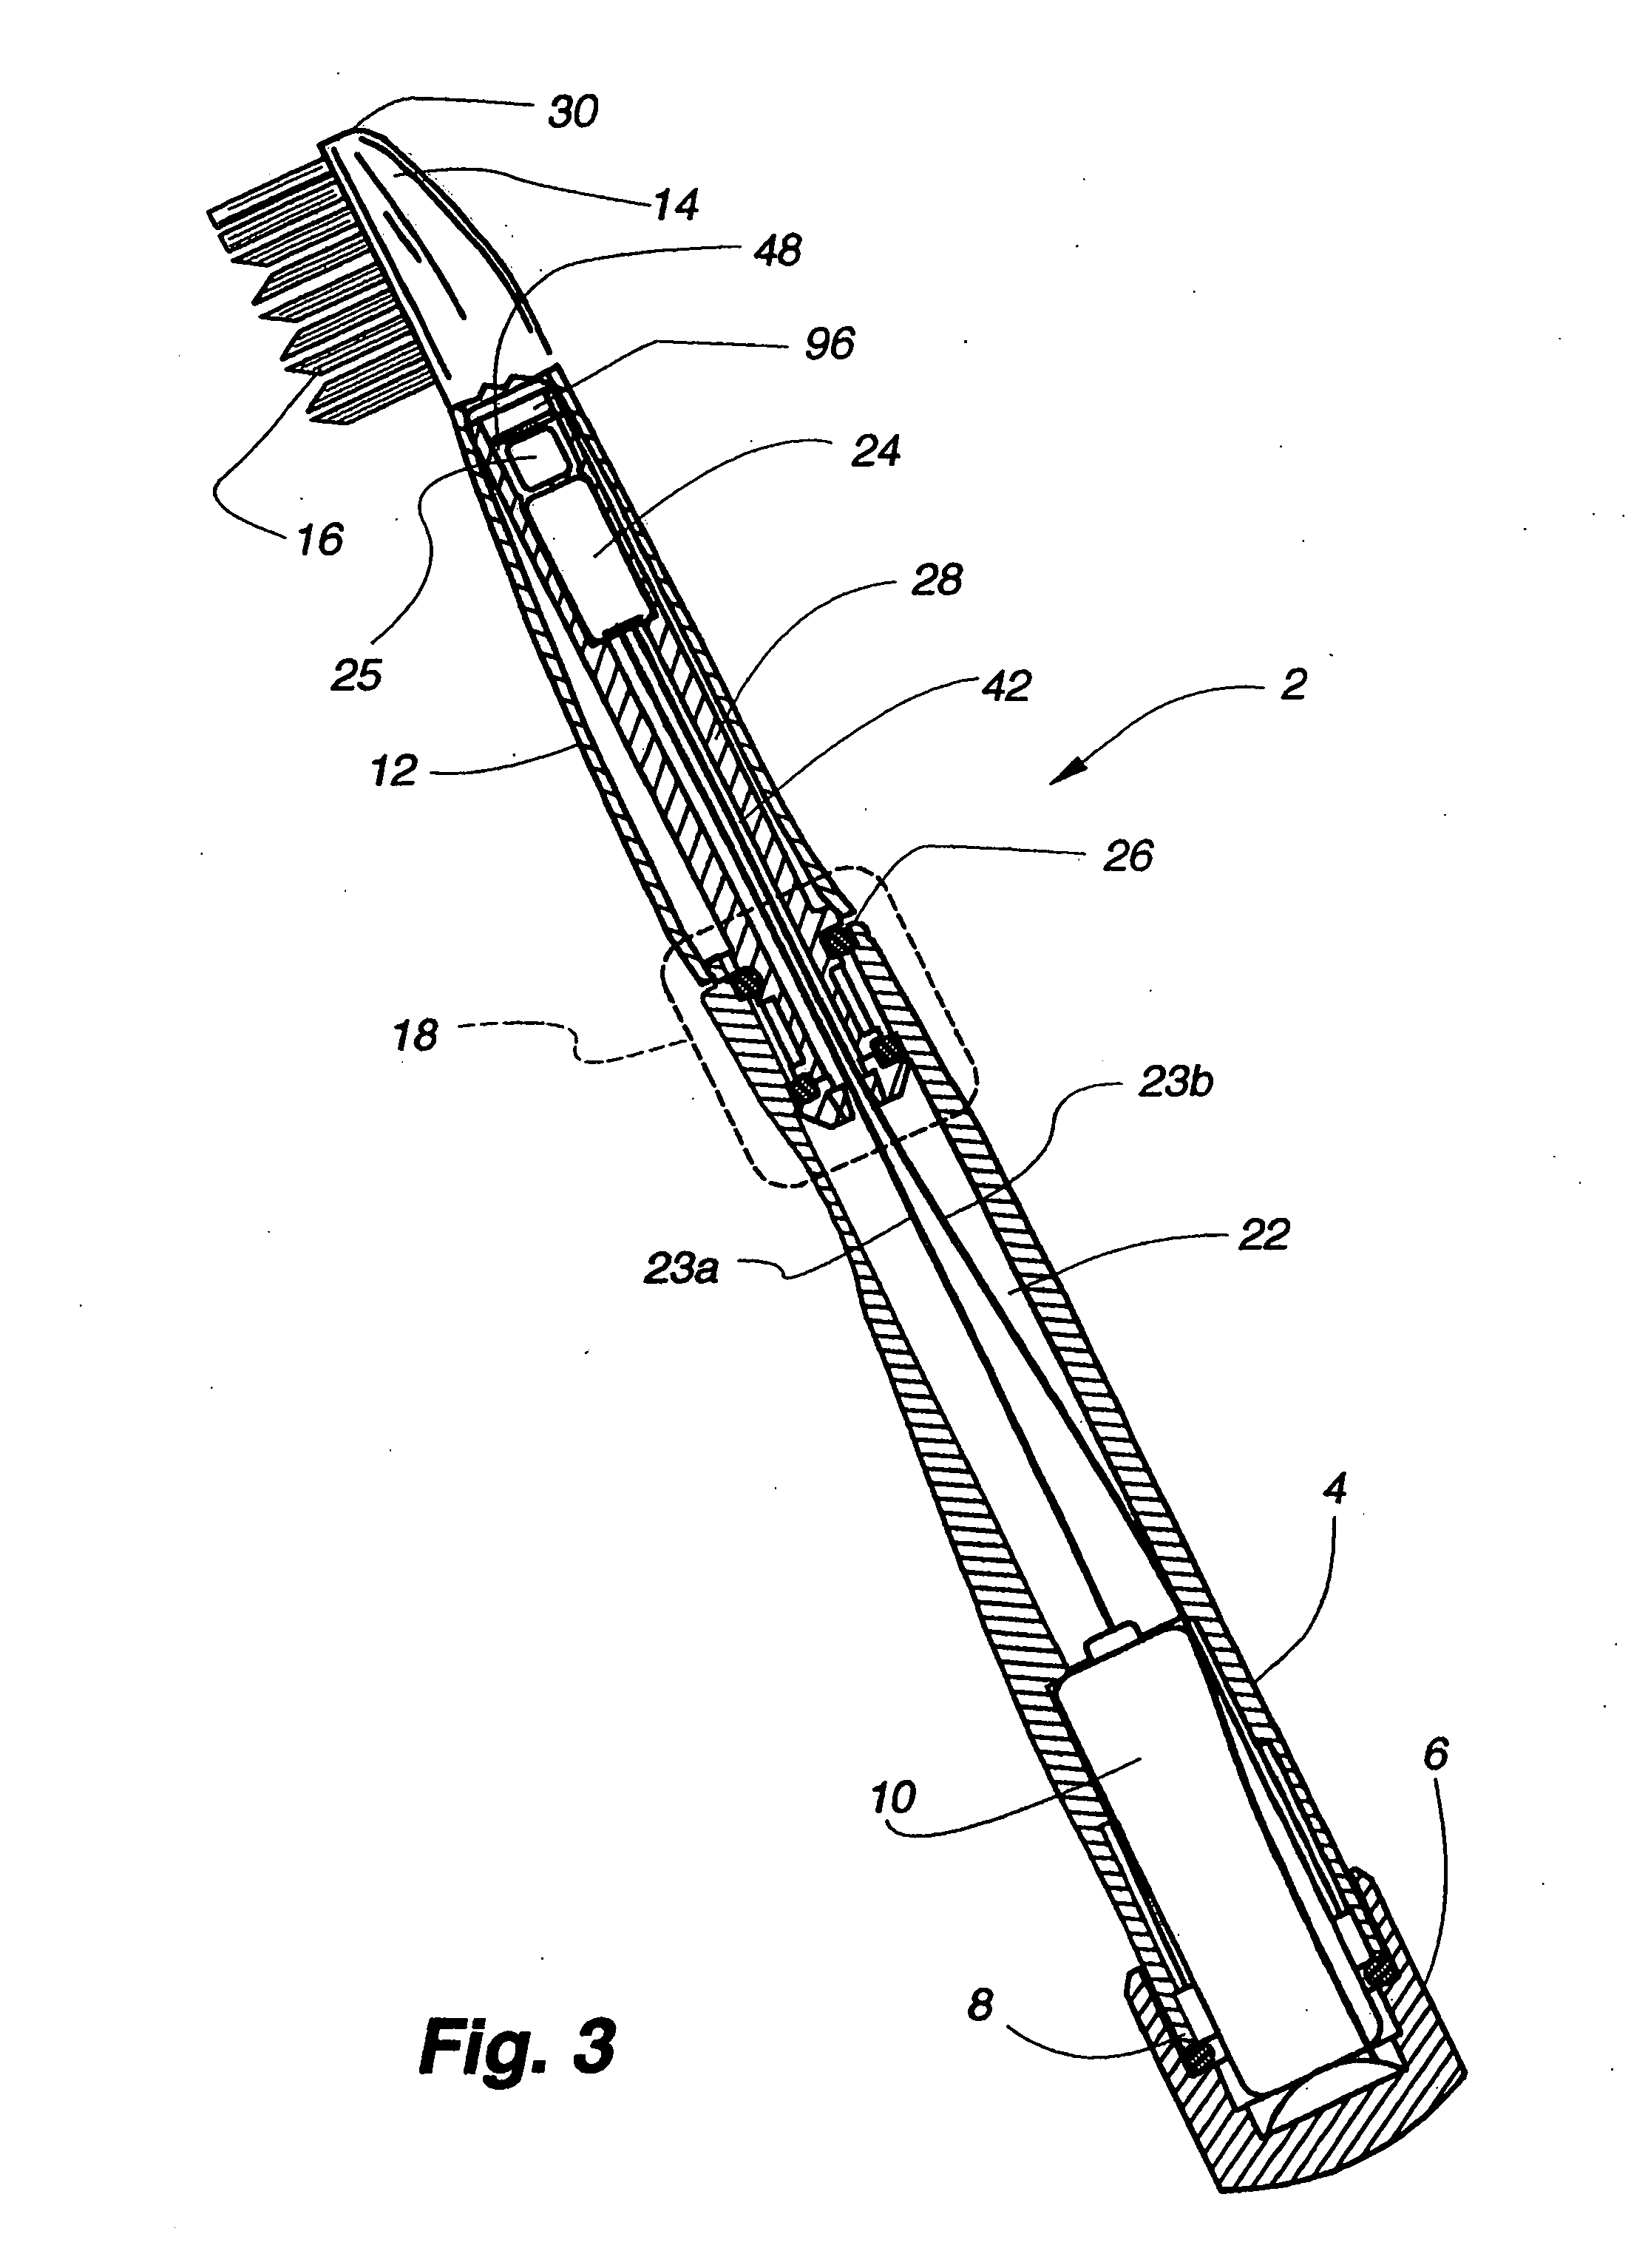 Flosser with motor integrated with vibrating head